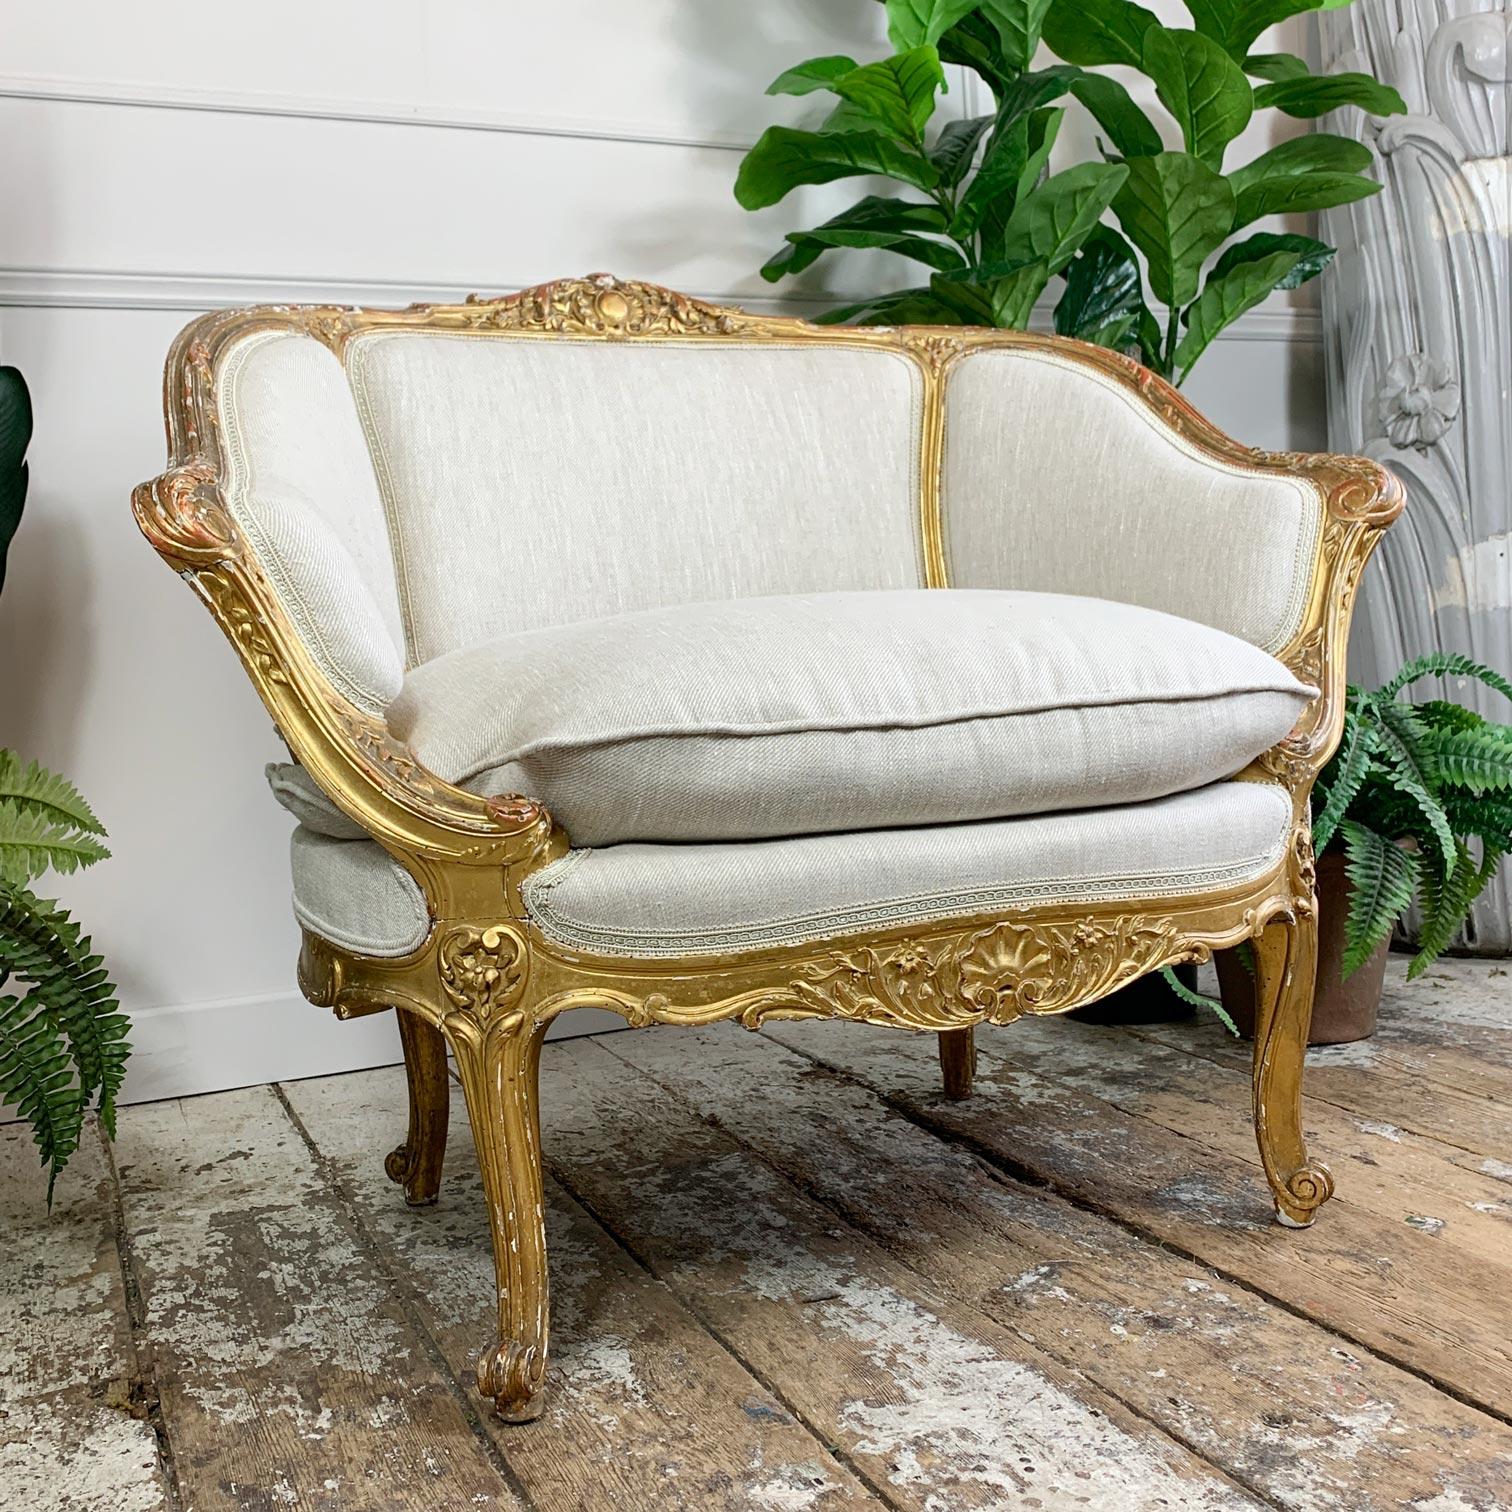 French 19th C Gilt Wood Louis XV Fauteuil Marquise Chair 2